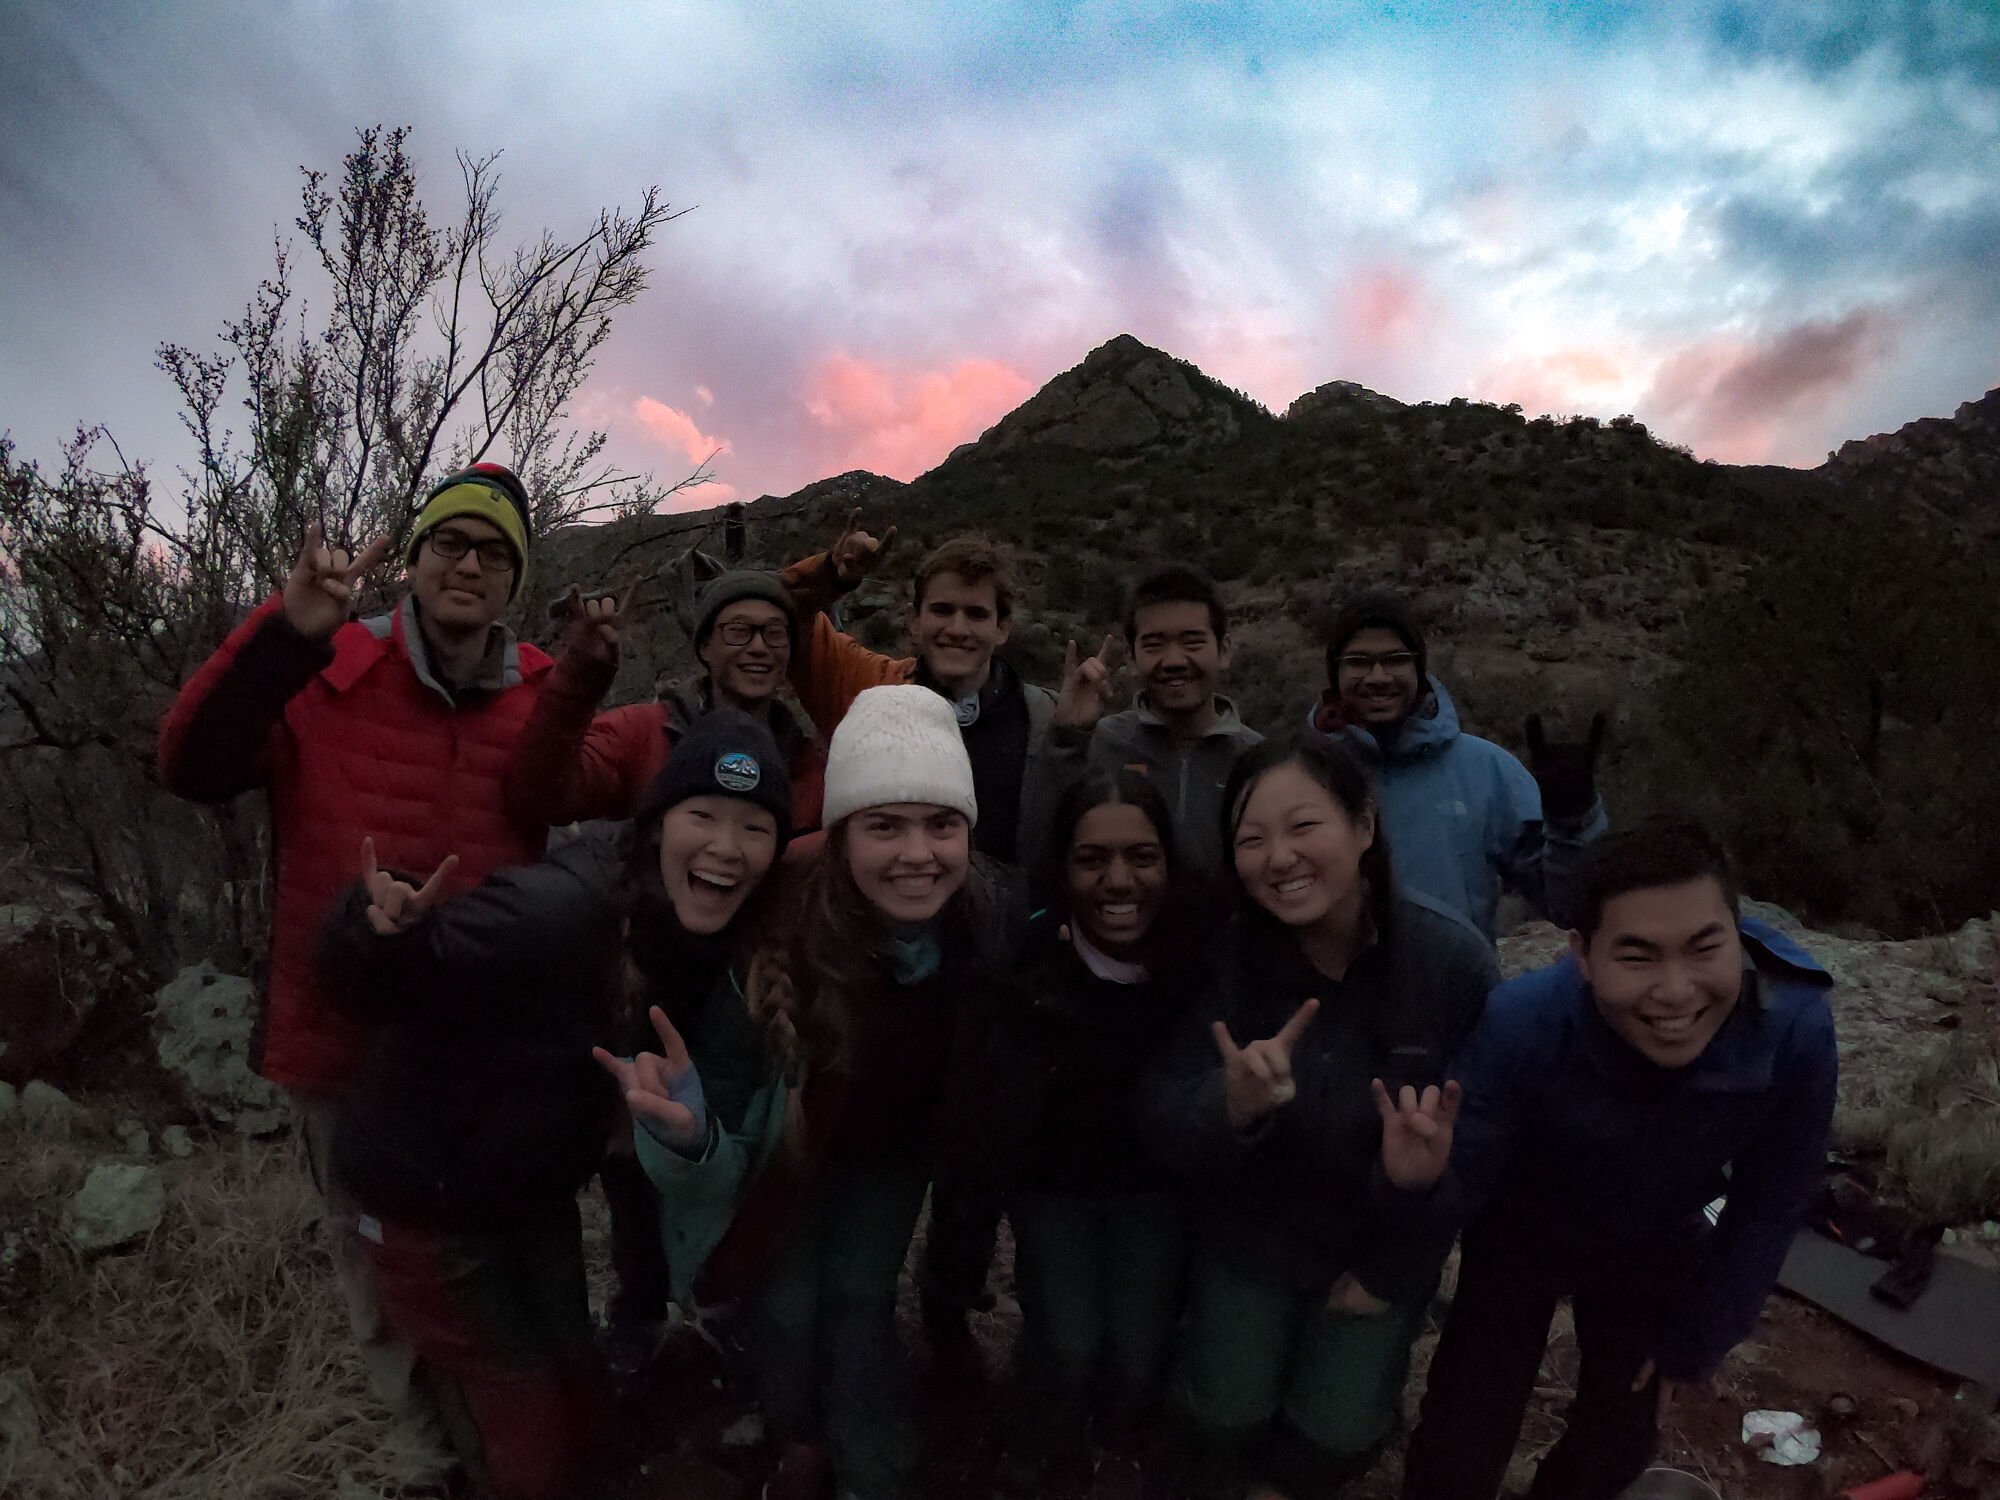 A group of business school students on a NOLS expedition hold up hand signals while the sun sets behind them